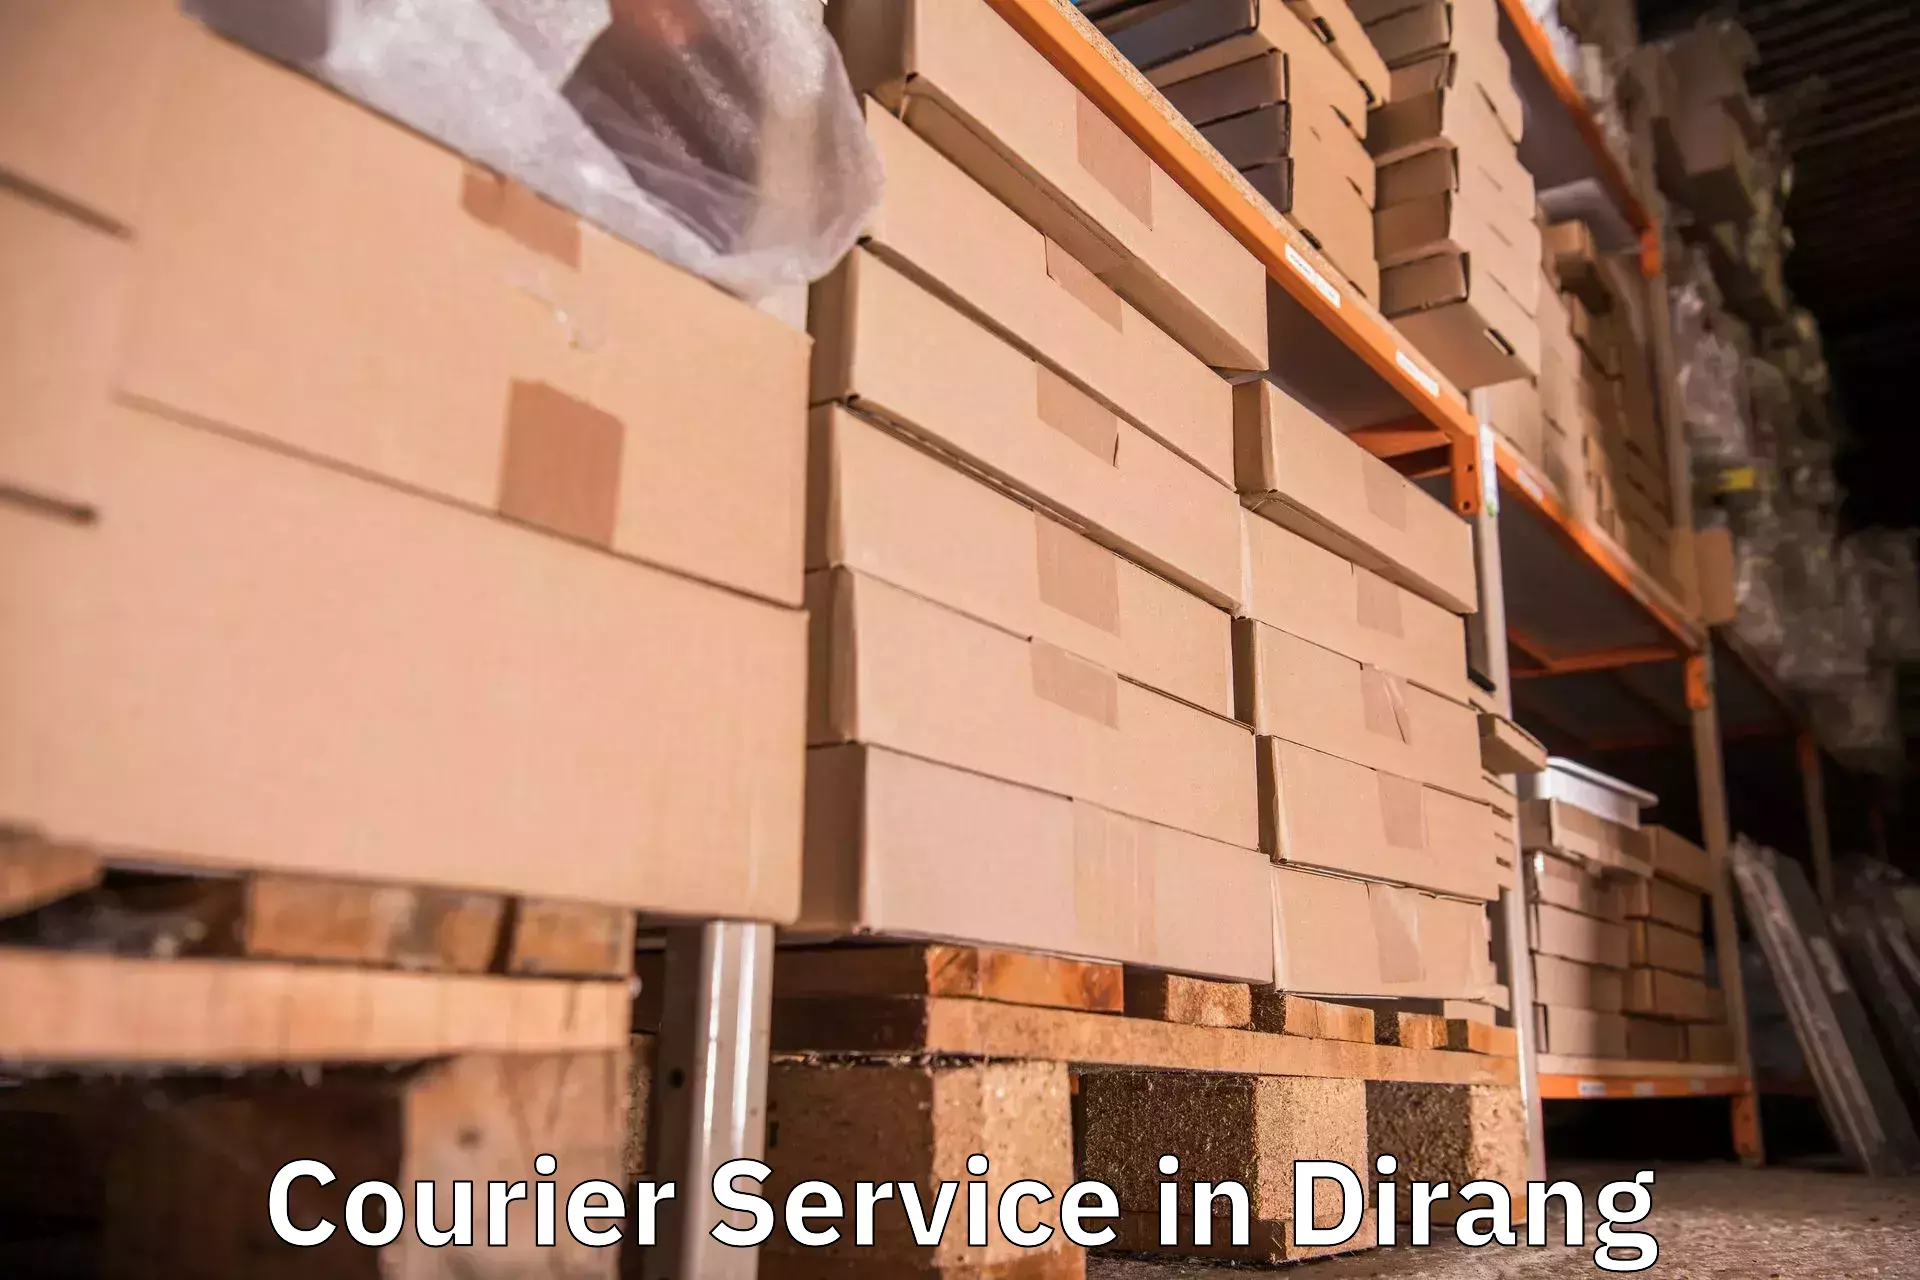 Small parcel delivery in Dirang